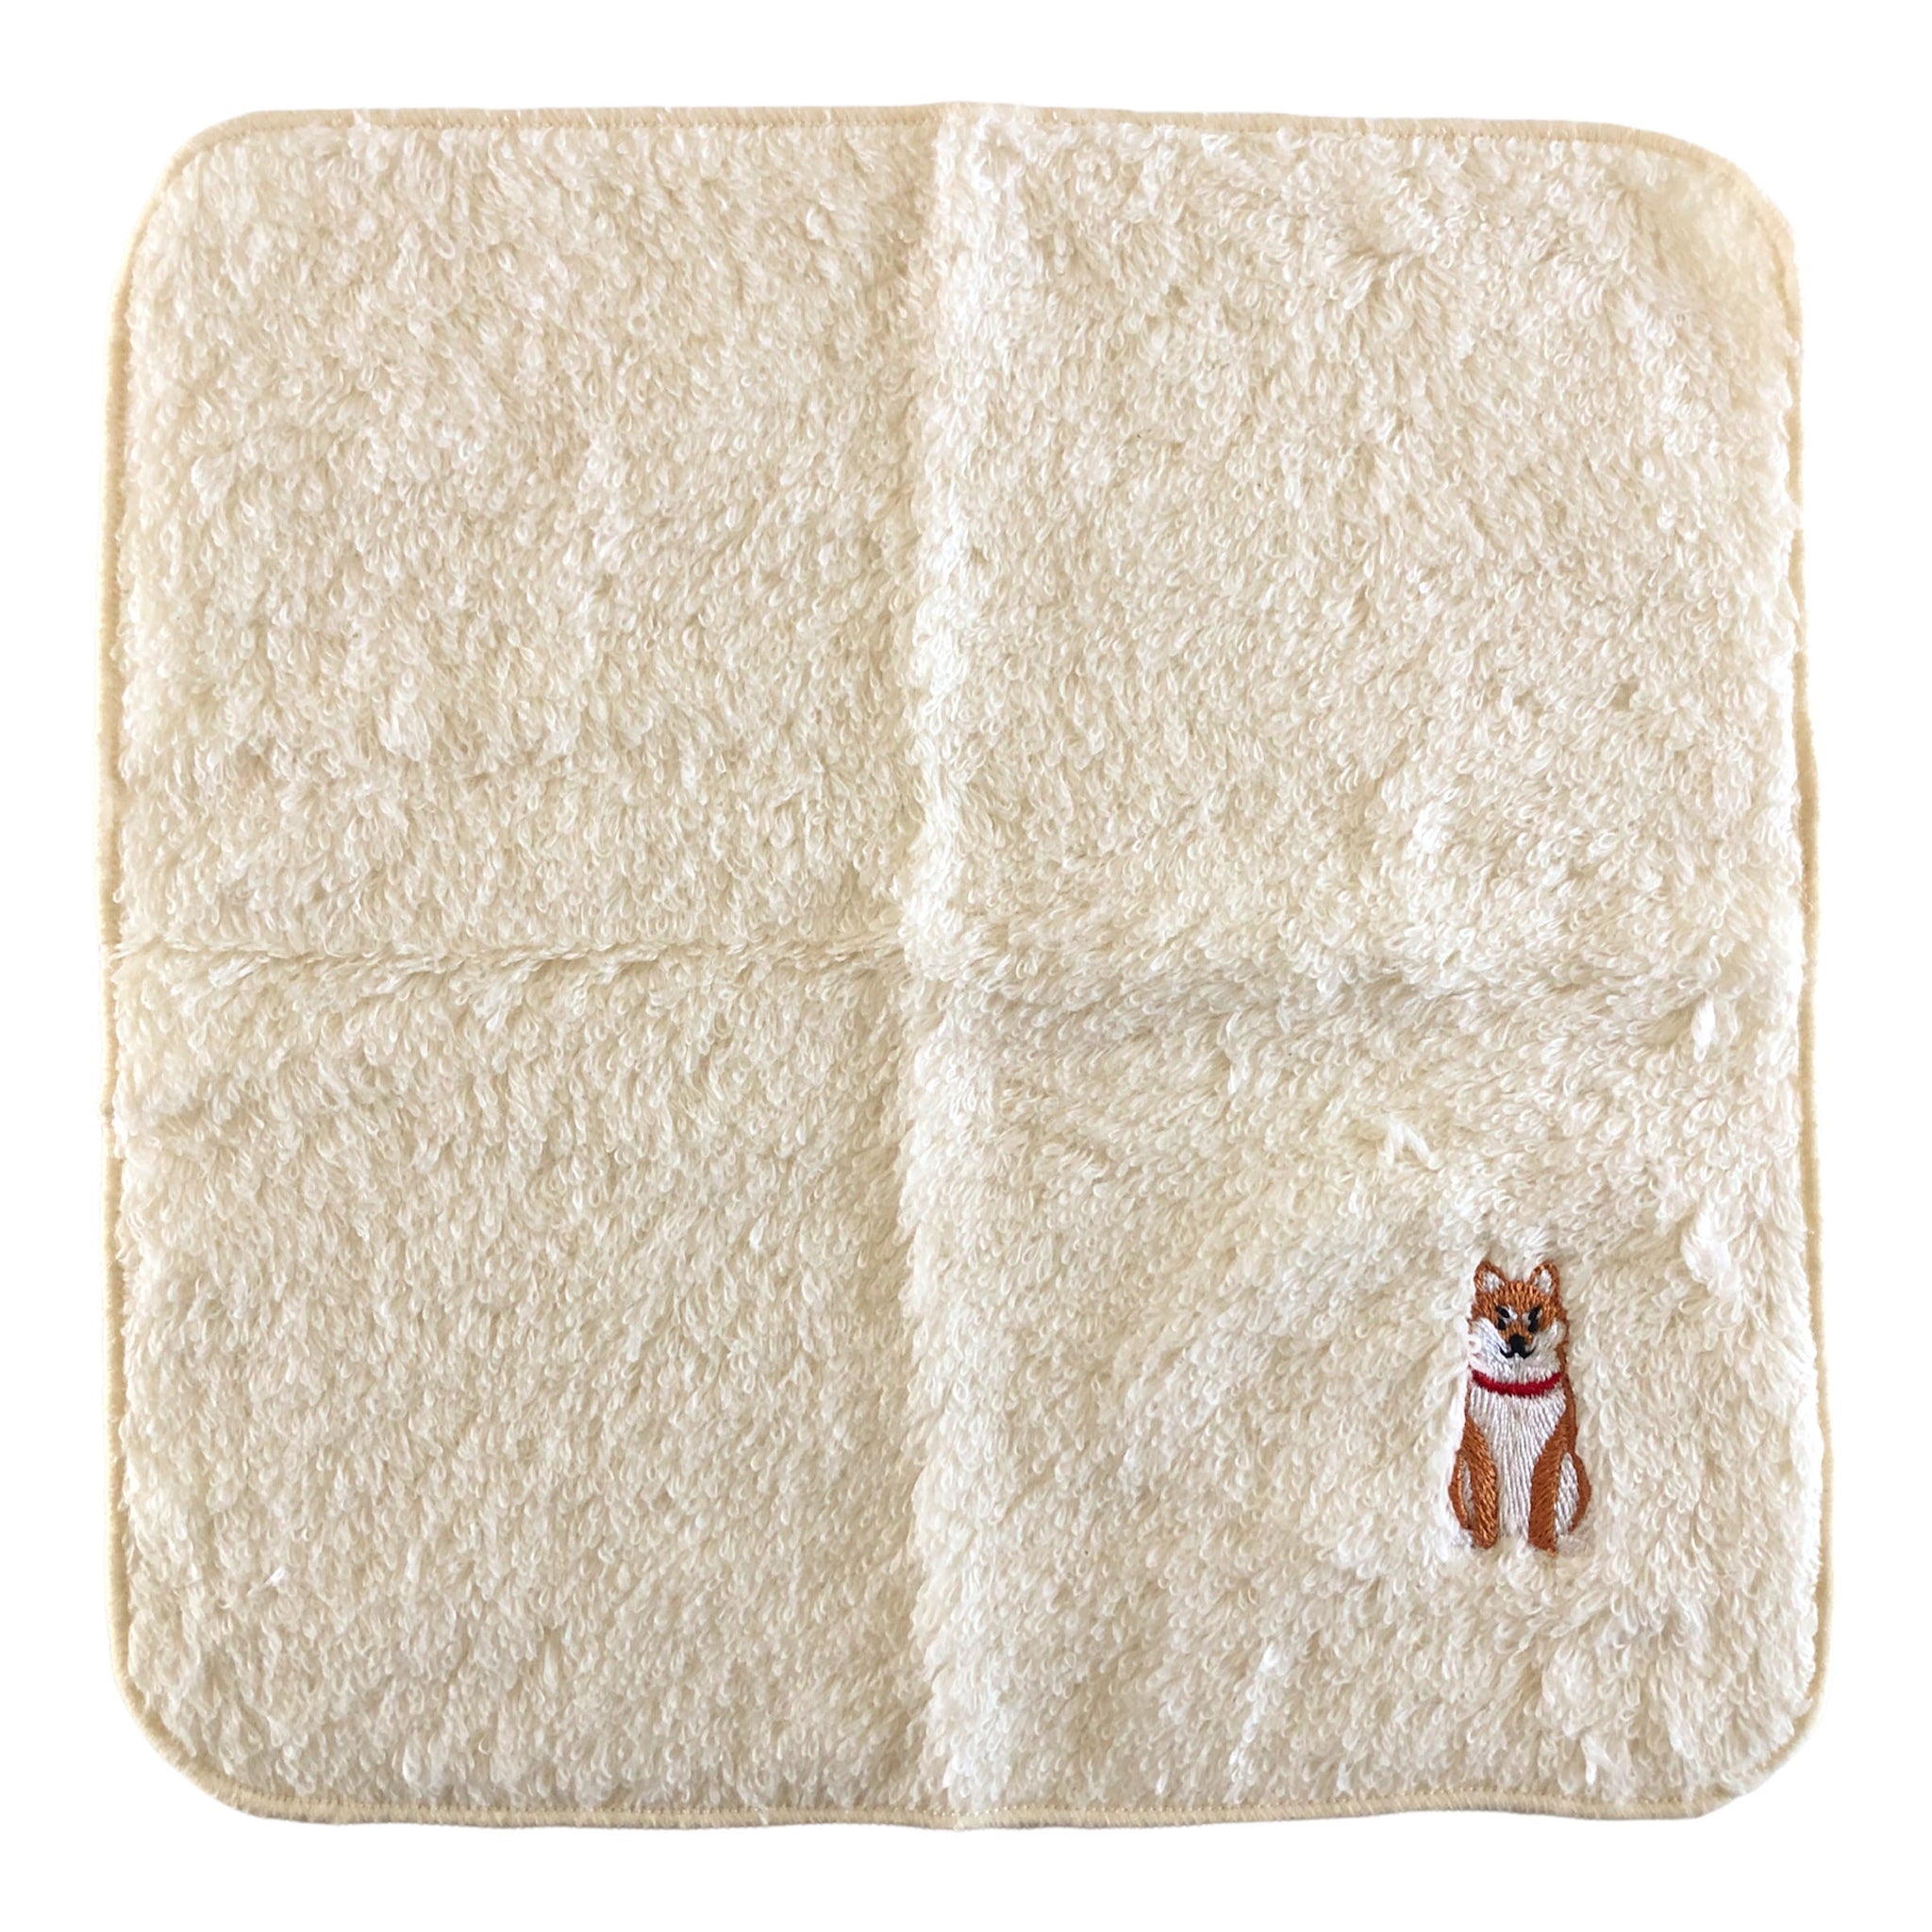 Shiba Inu Red Sitting Fluffy Pile Towel-Like Handkerchief with Elegant Embroidered